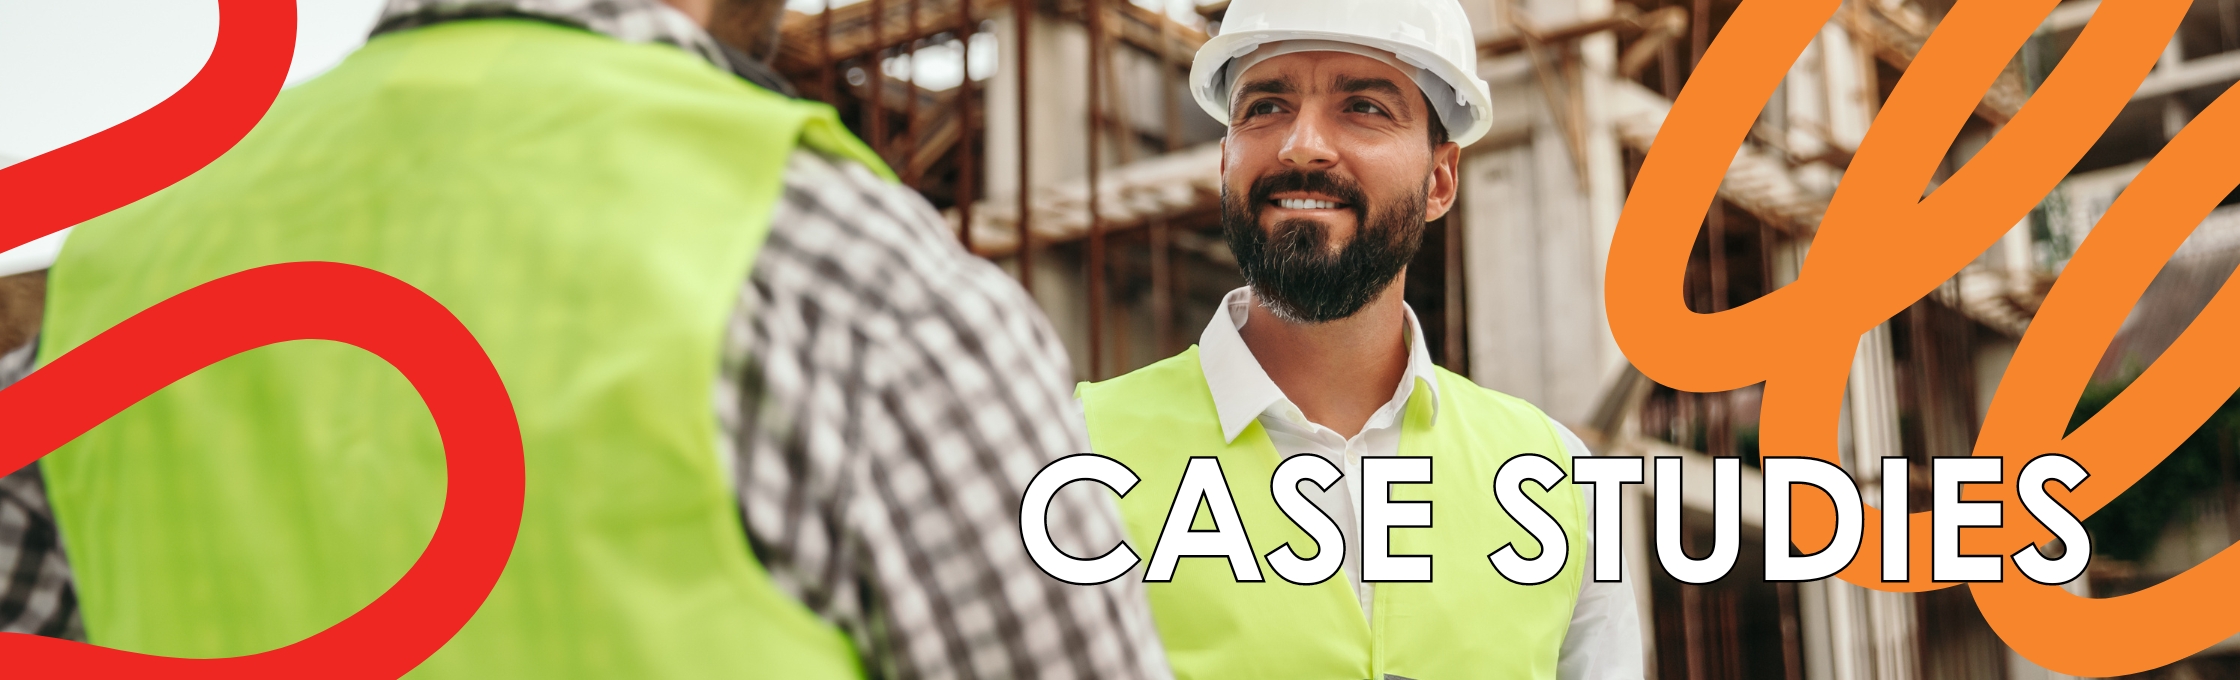 a builder smiling with case study text overlaid